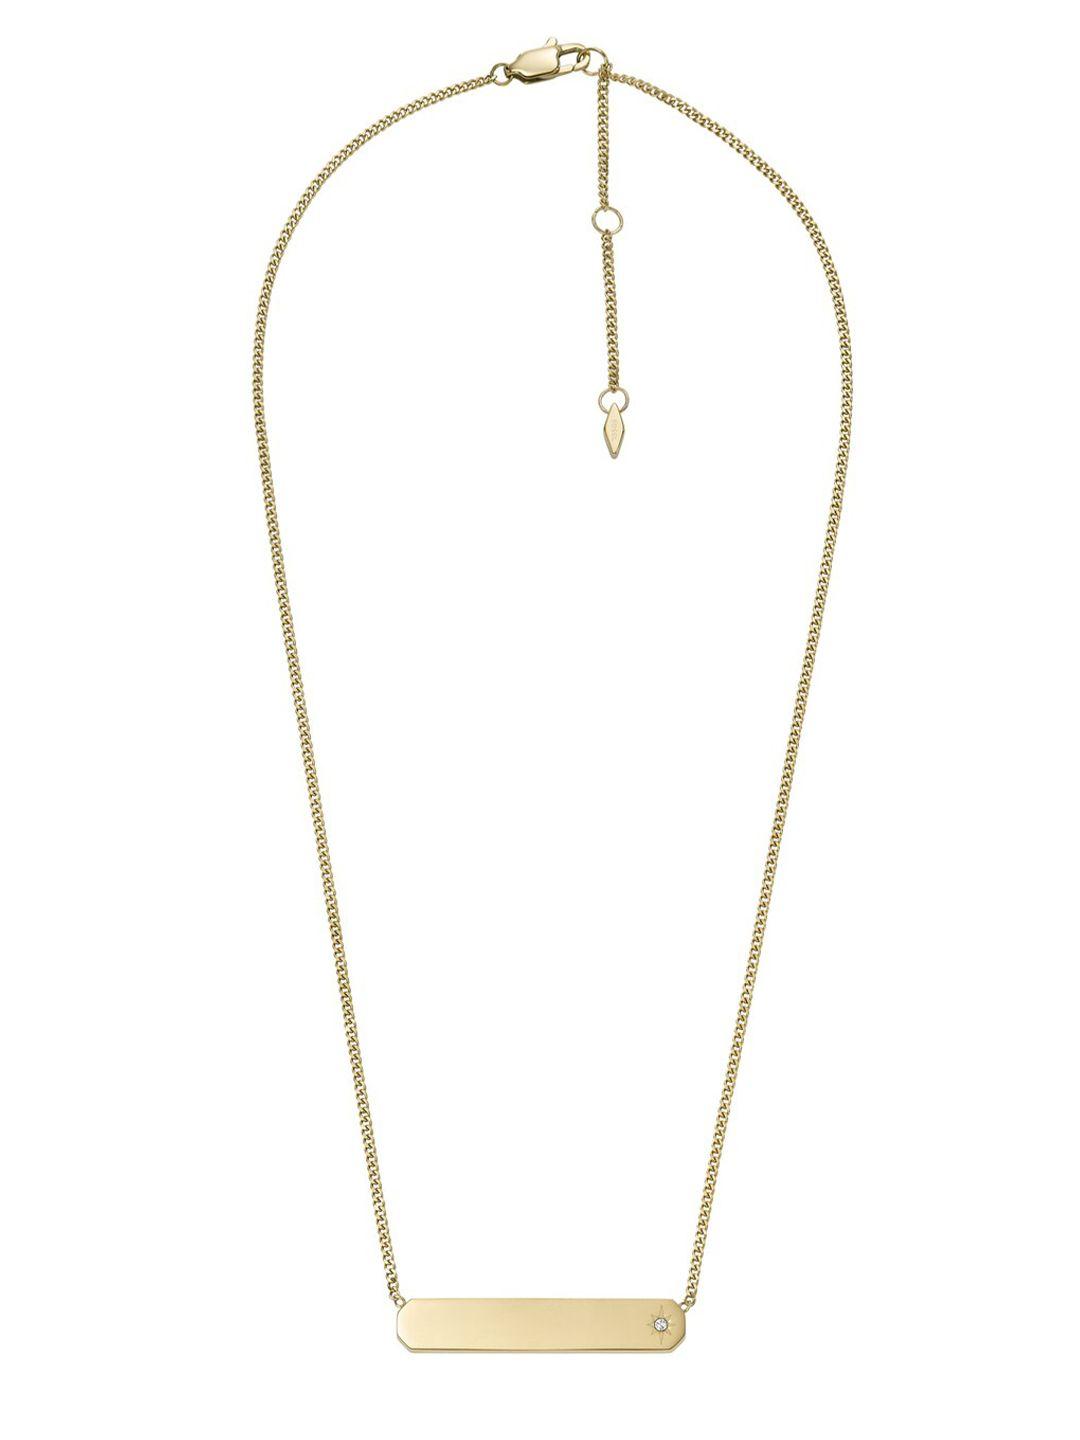 fossil drew gold-plated rectangular necklace